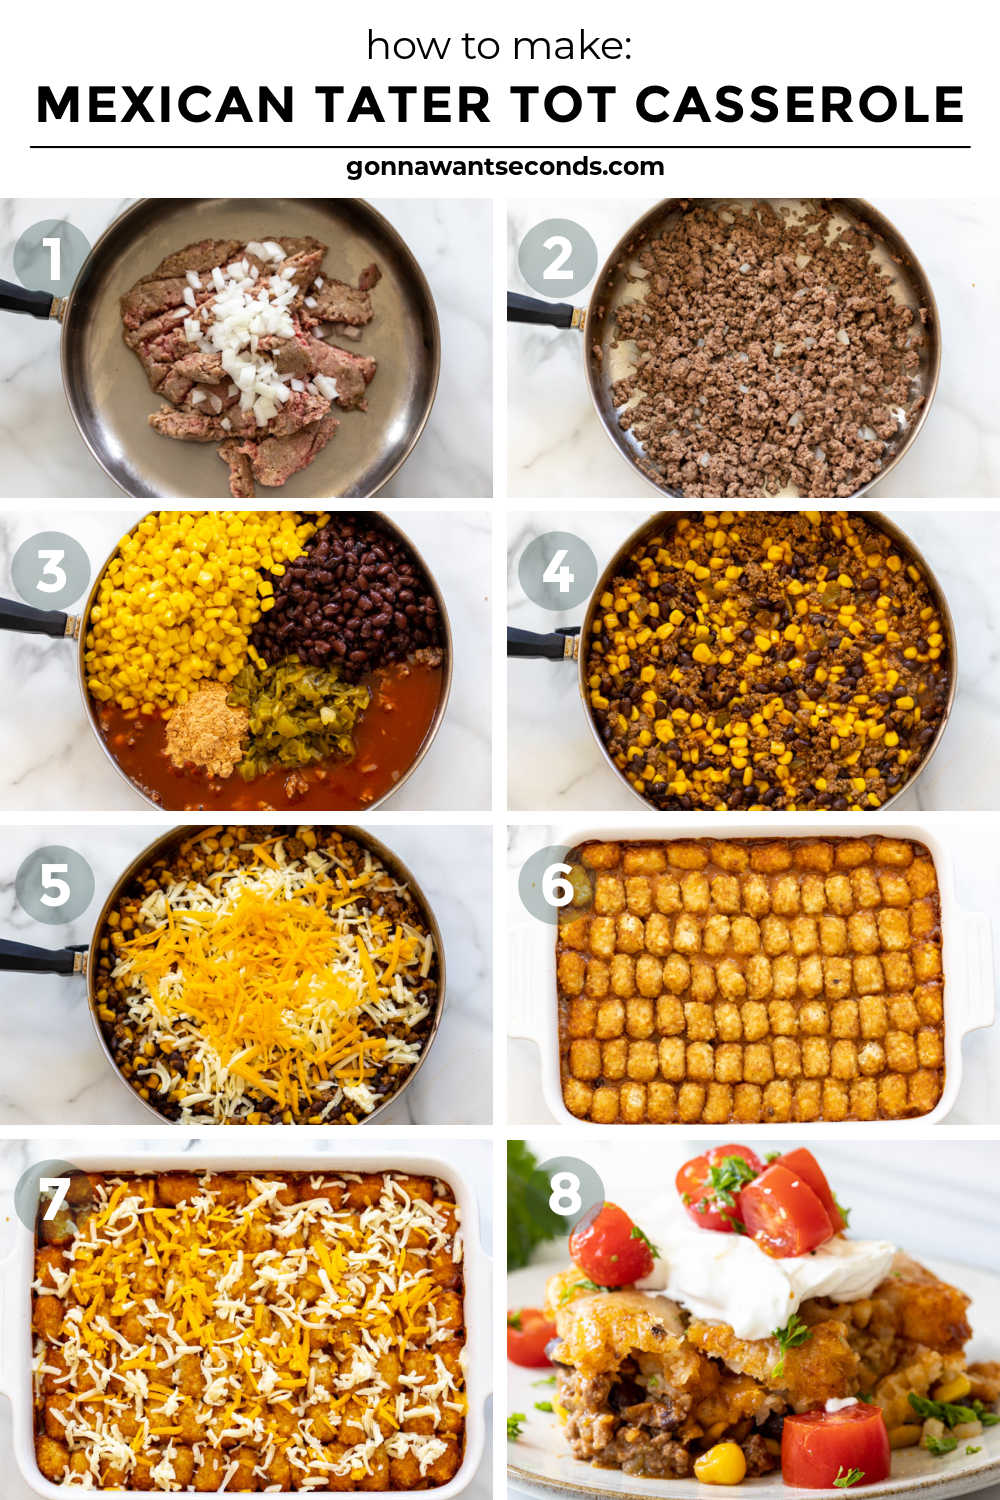 Step by step how to make Mexican tater tot casserole